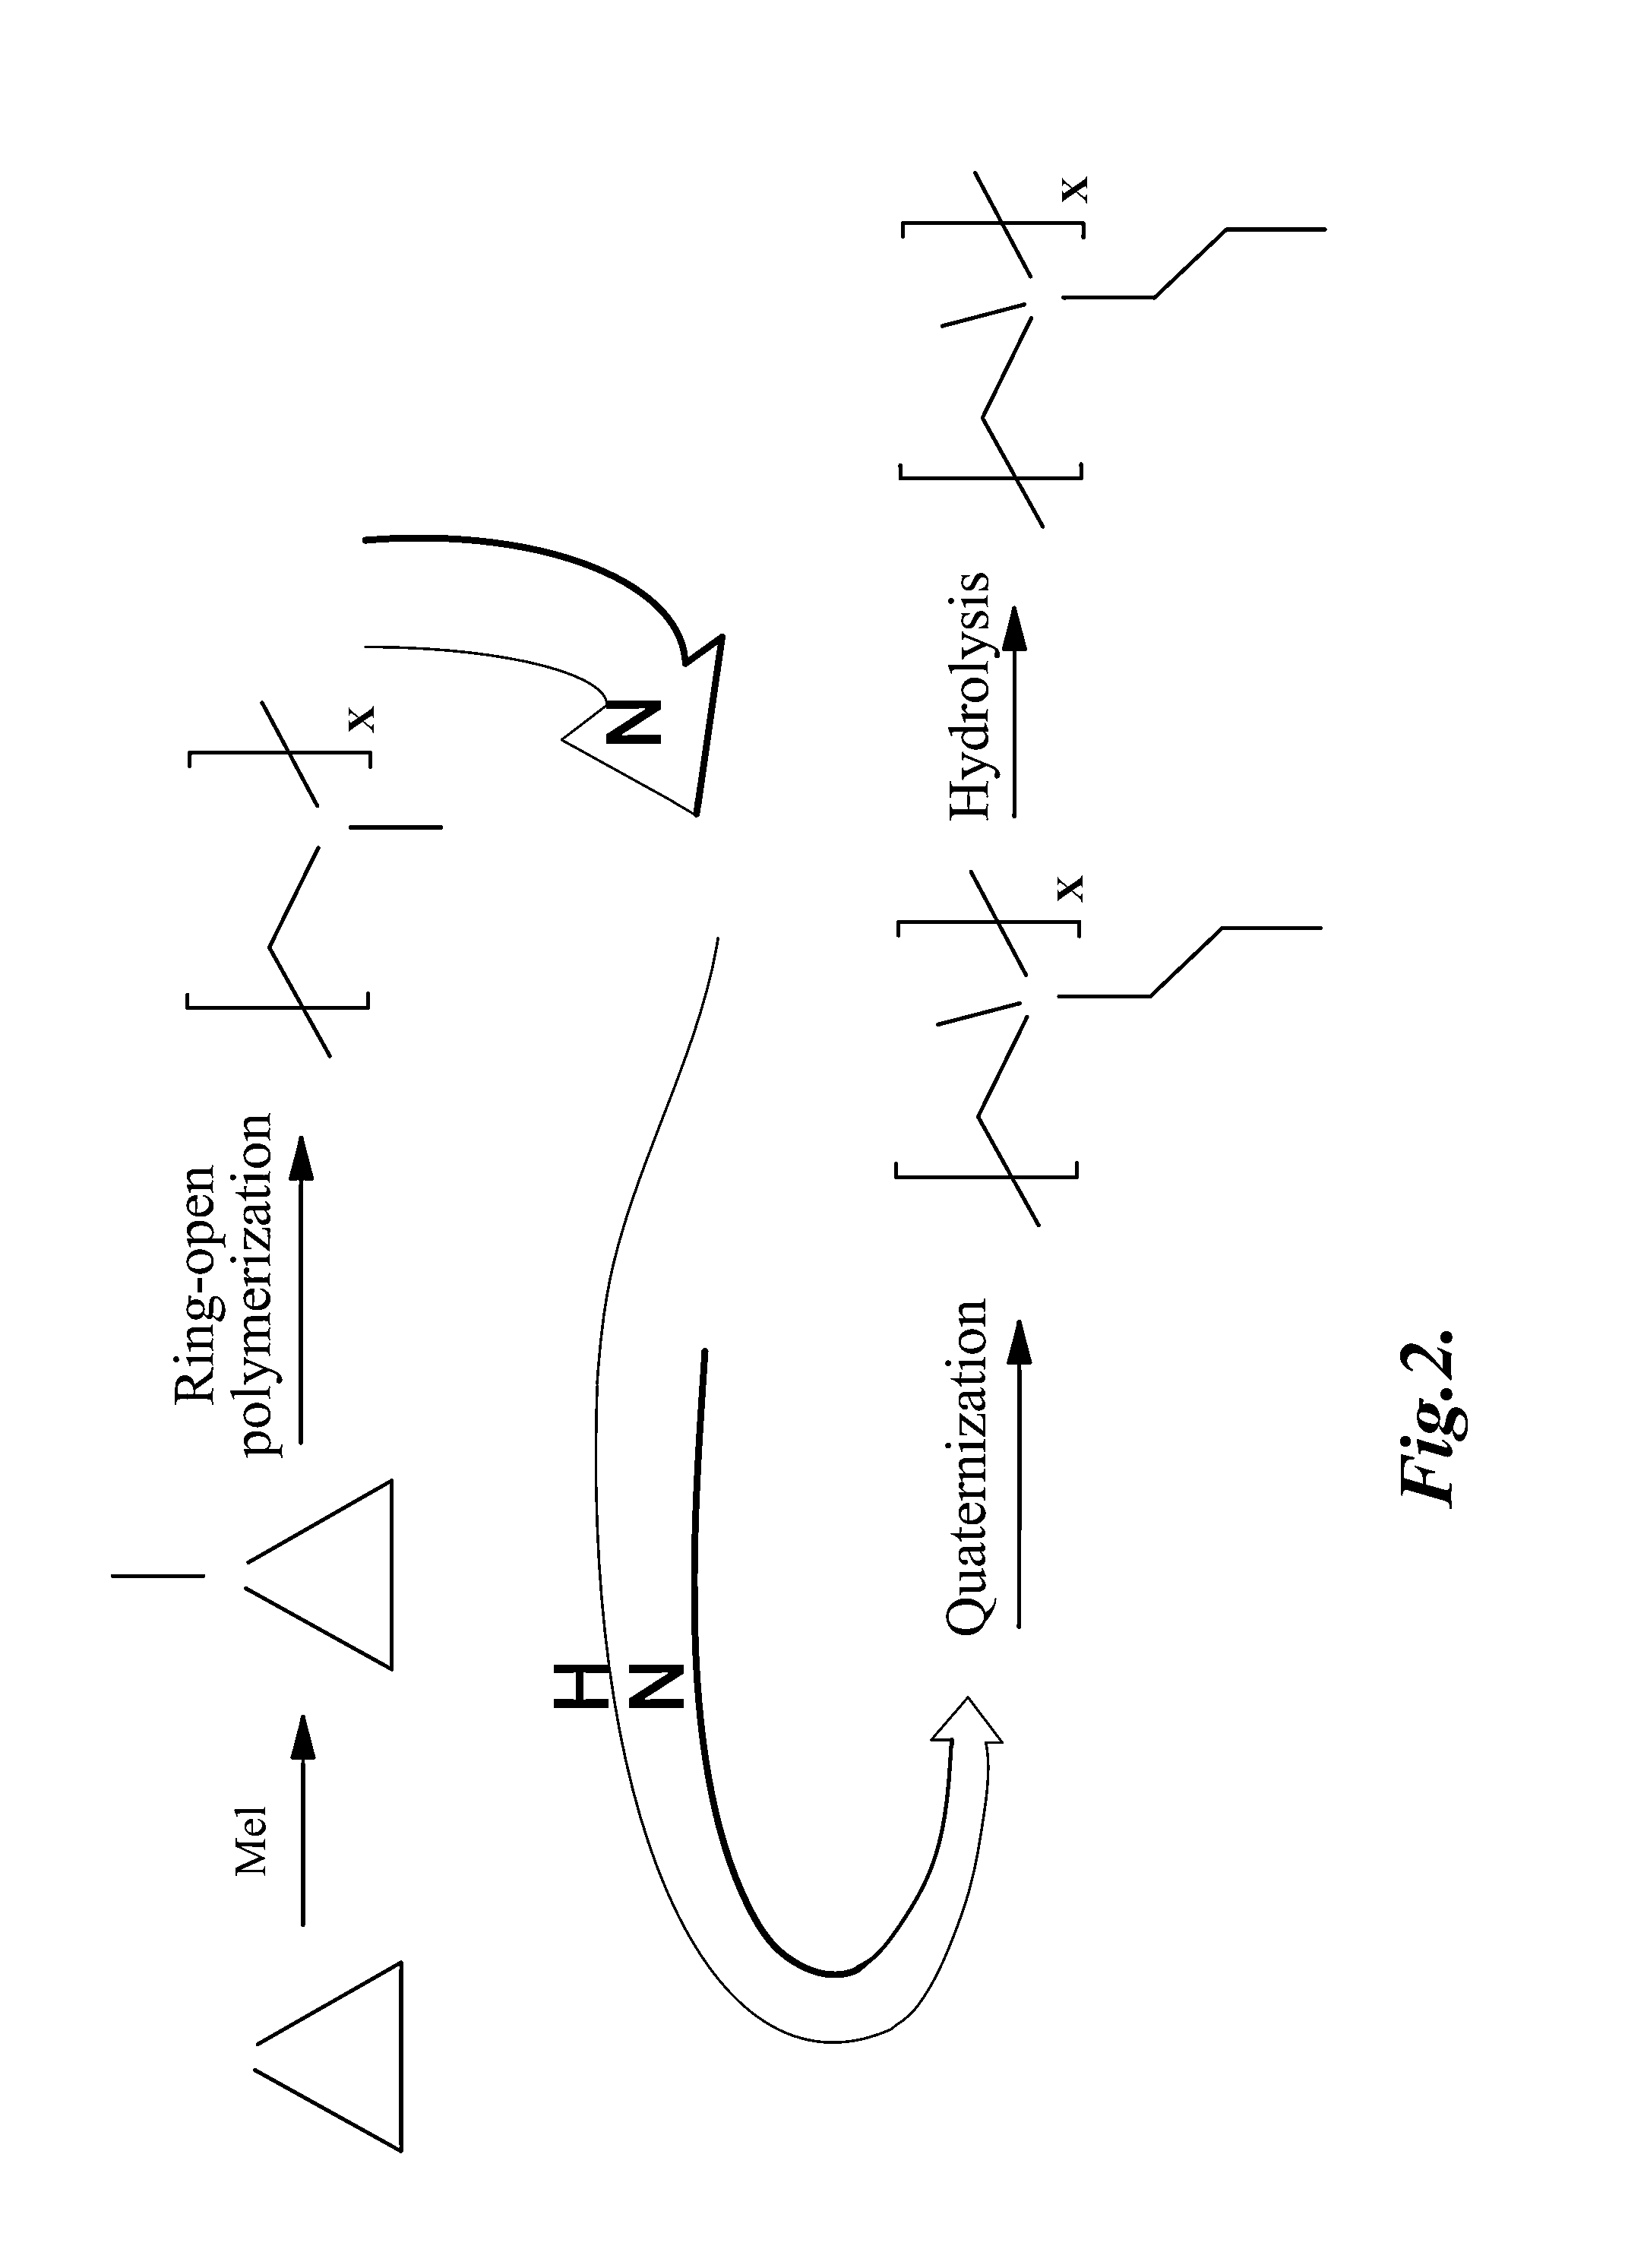 Dual-functional nonfouling surfaces comprising target binding partner covalently coupled to polymer attached to substrate